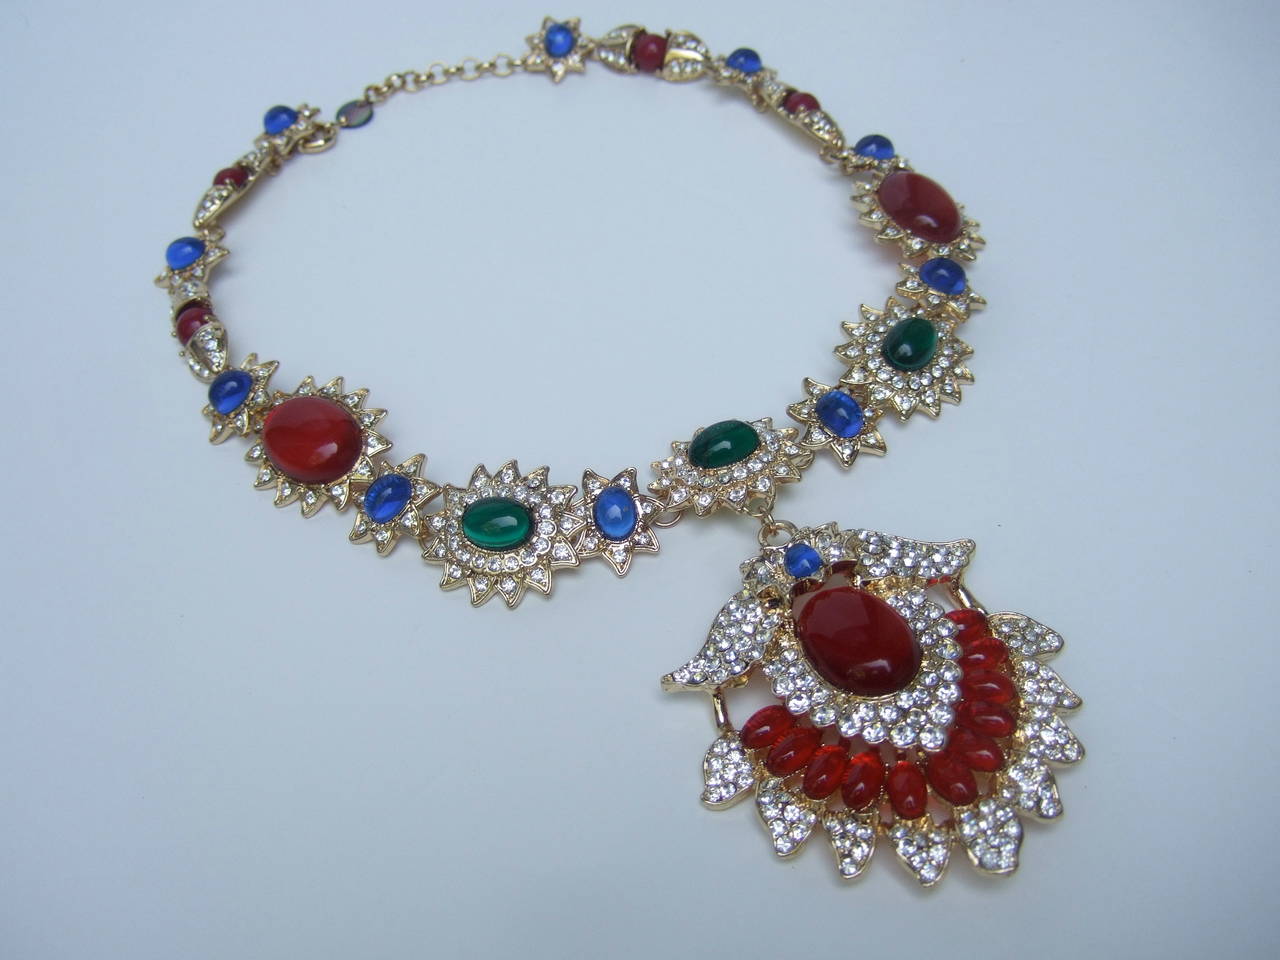 Stunning opulent jeweled cabochon & crystal necklace 
The lavish necklace is encrusted with glittering jewel tone lucite cabochons
& diamante crystals. The beautiful combination of faux resin rubies, sapphires 
& emerald green lucite cabochons